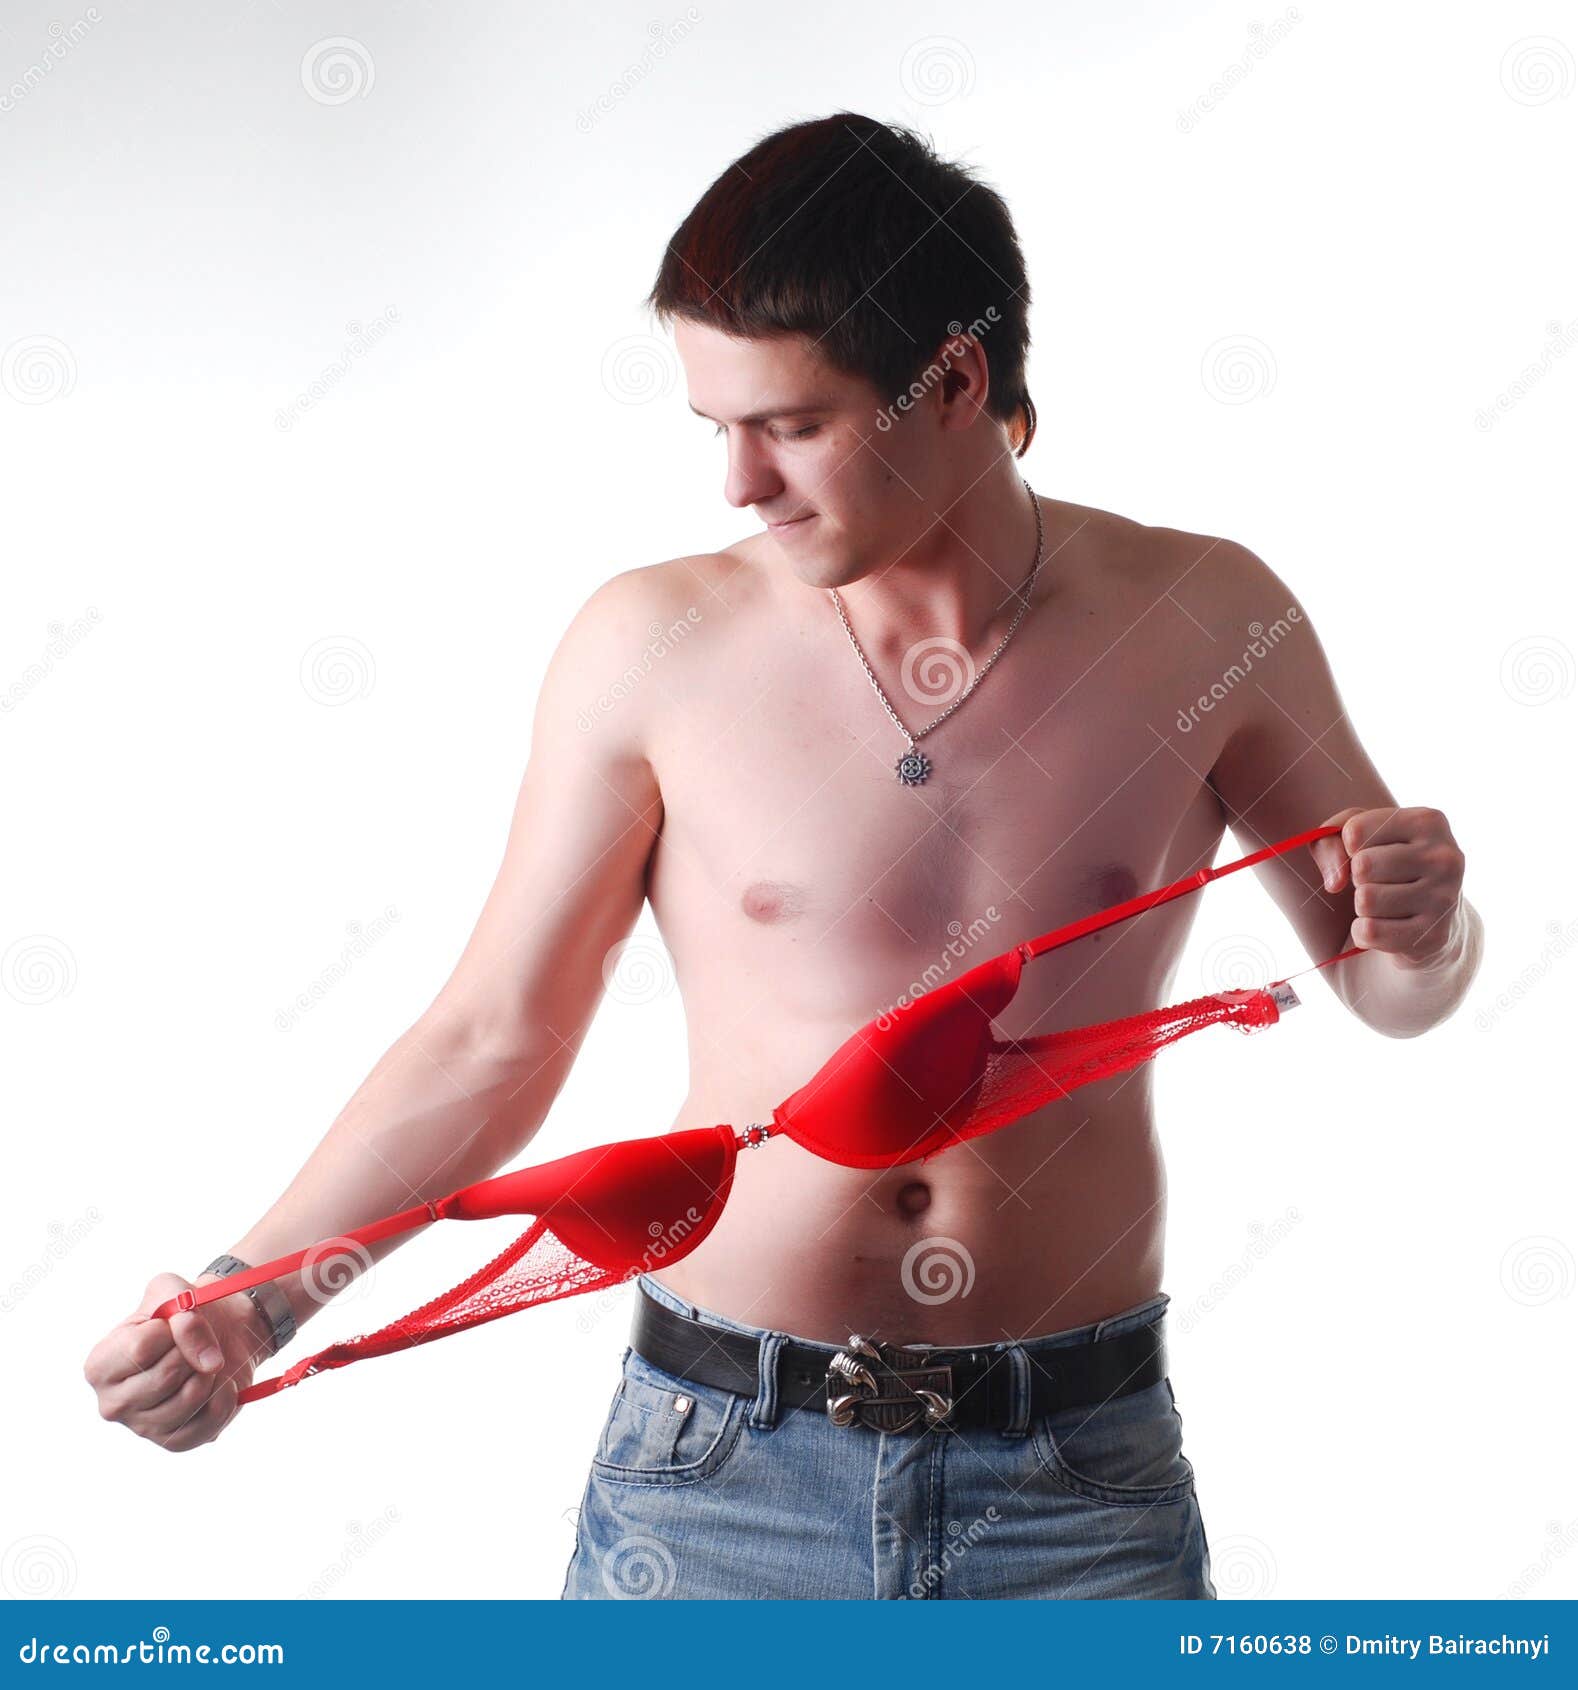 739 Attractive Man Bra Photos - Free & Royalty-Free Stock Photos from  Dreamstime